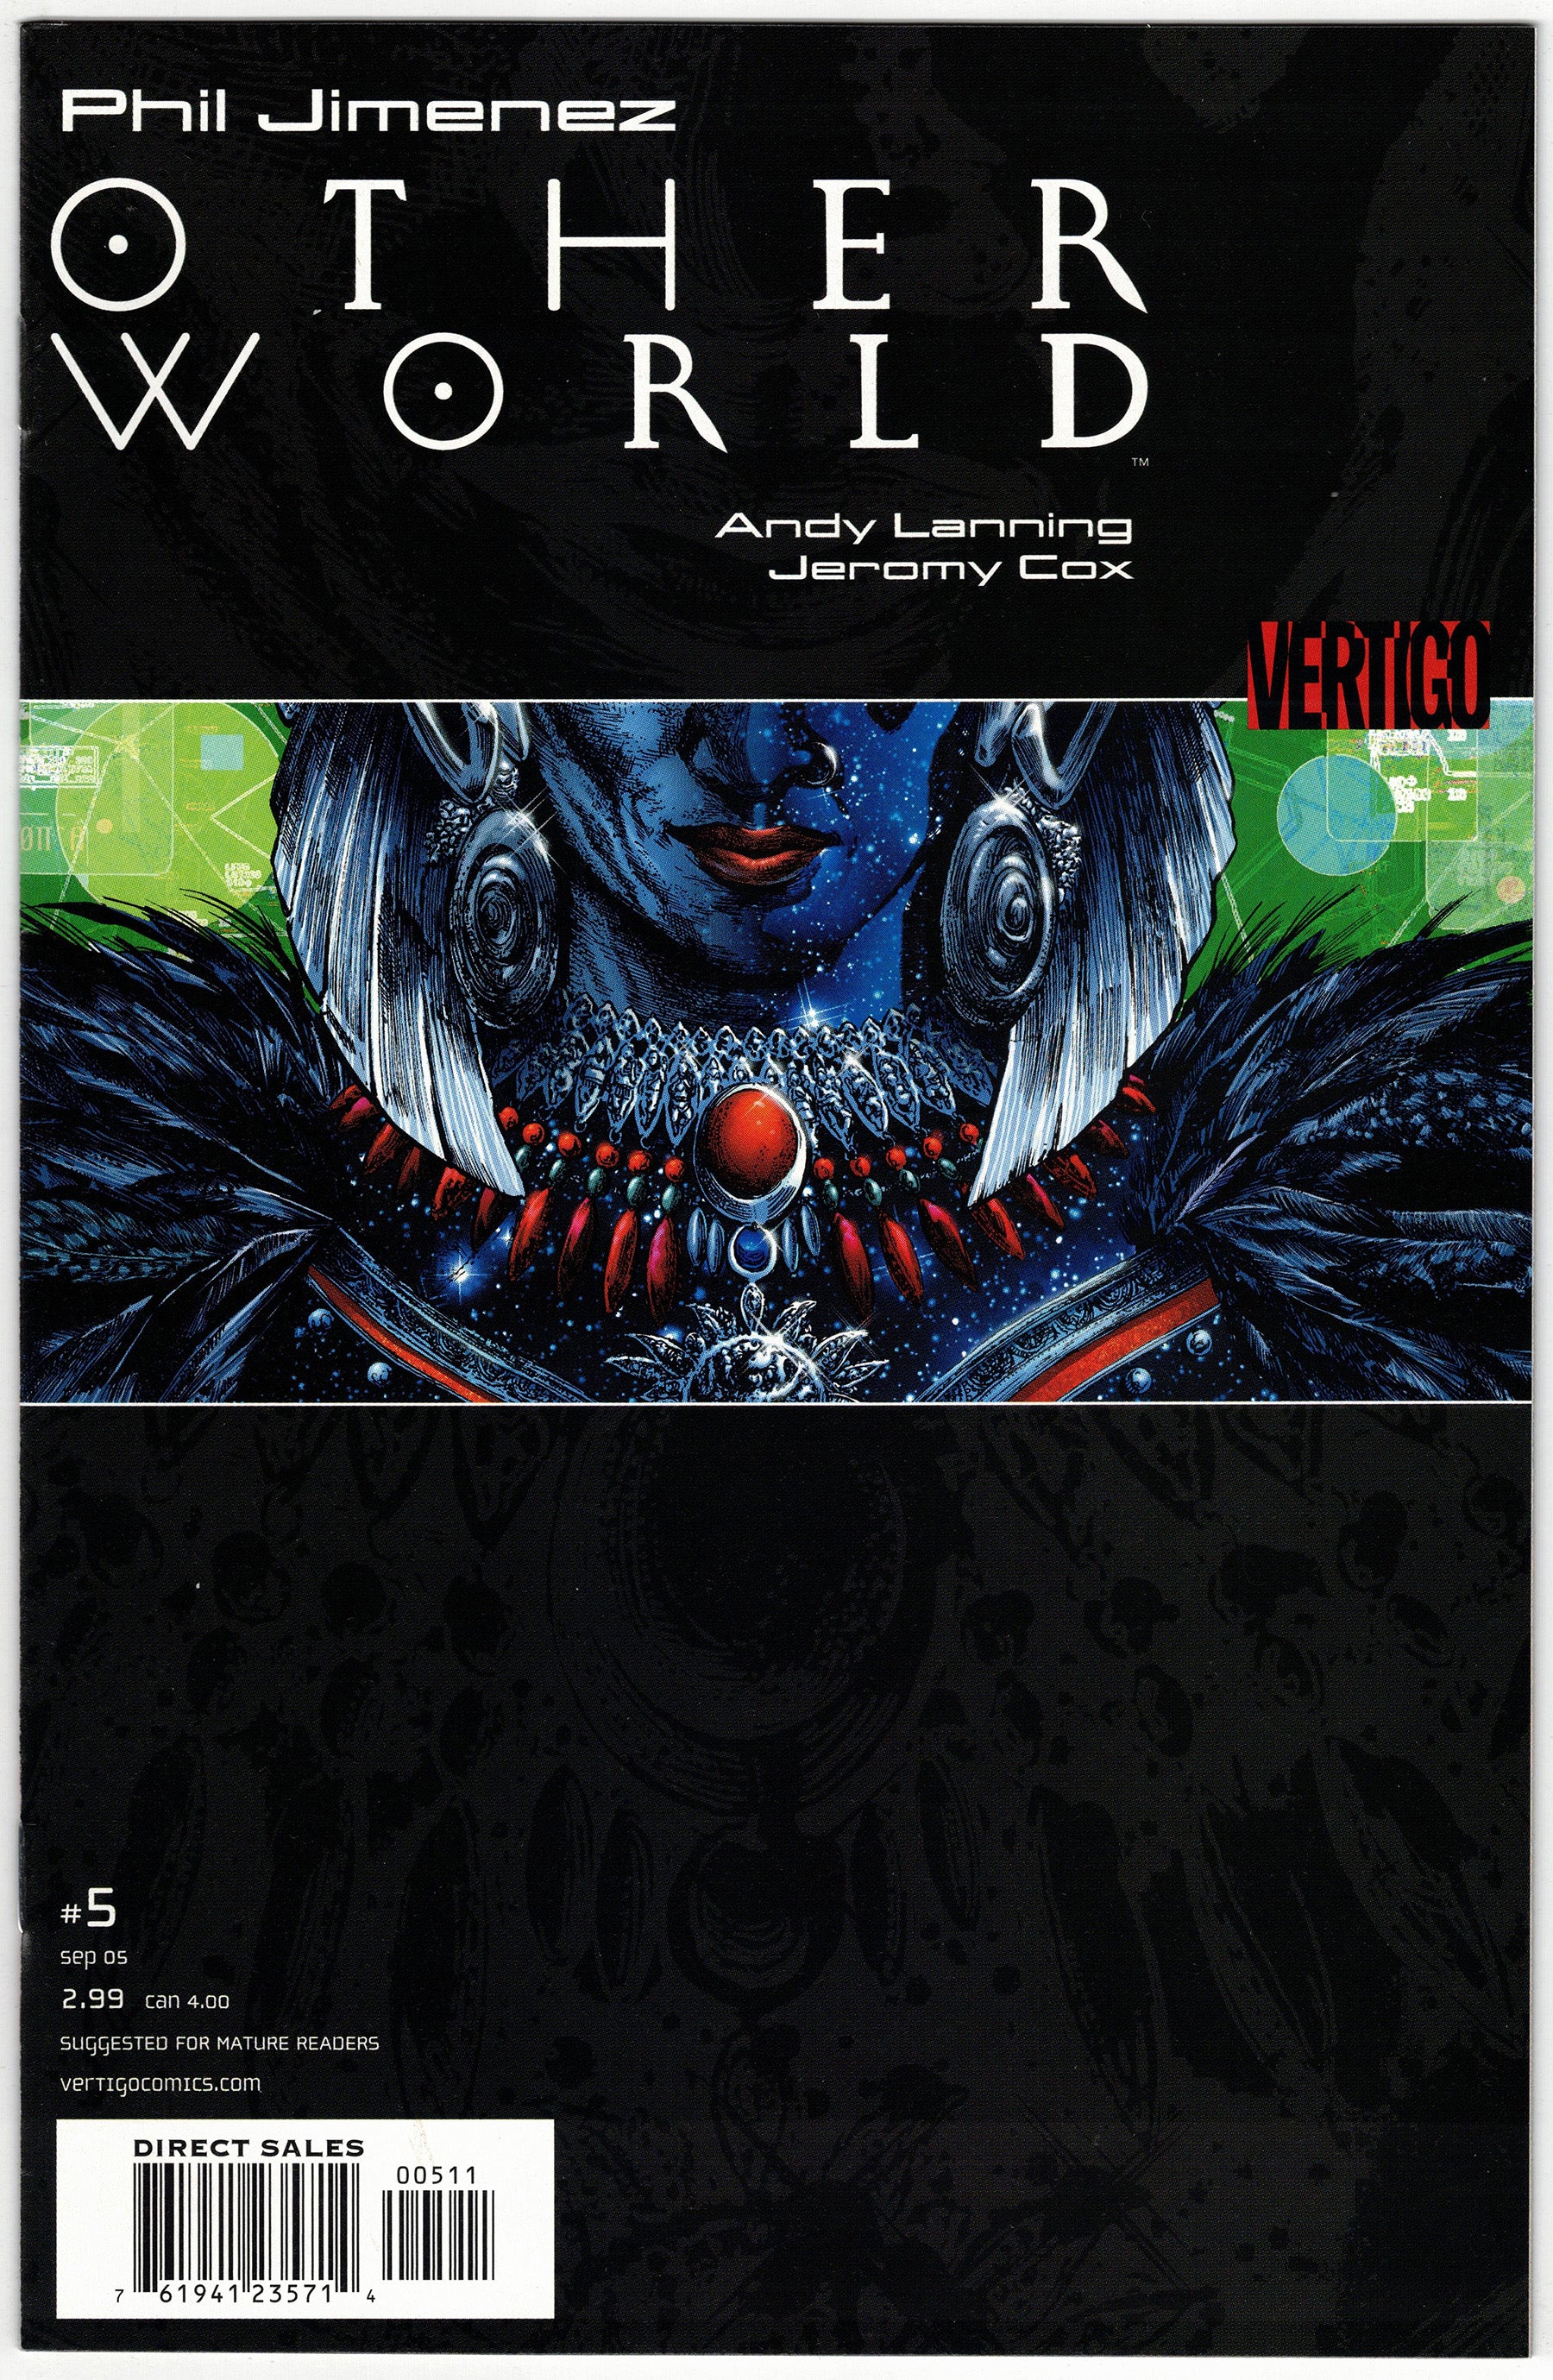 Photo of Otherworld (2005) Issue 5 Comic sold by Stronghold Collectibles